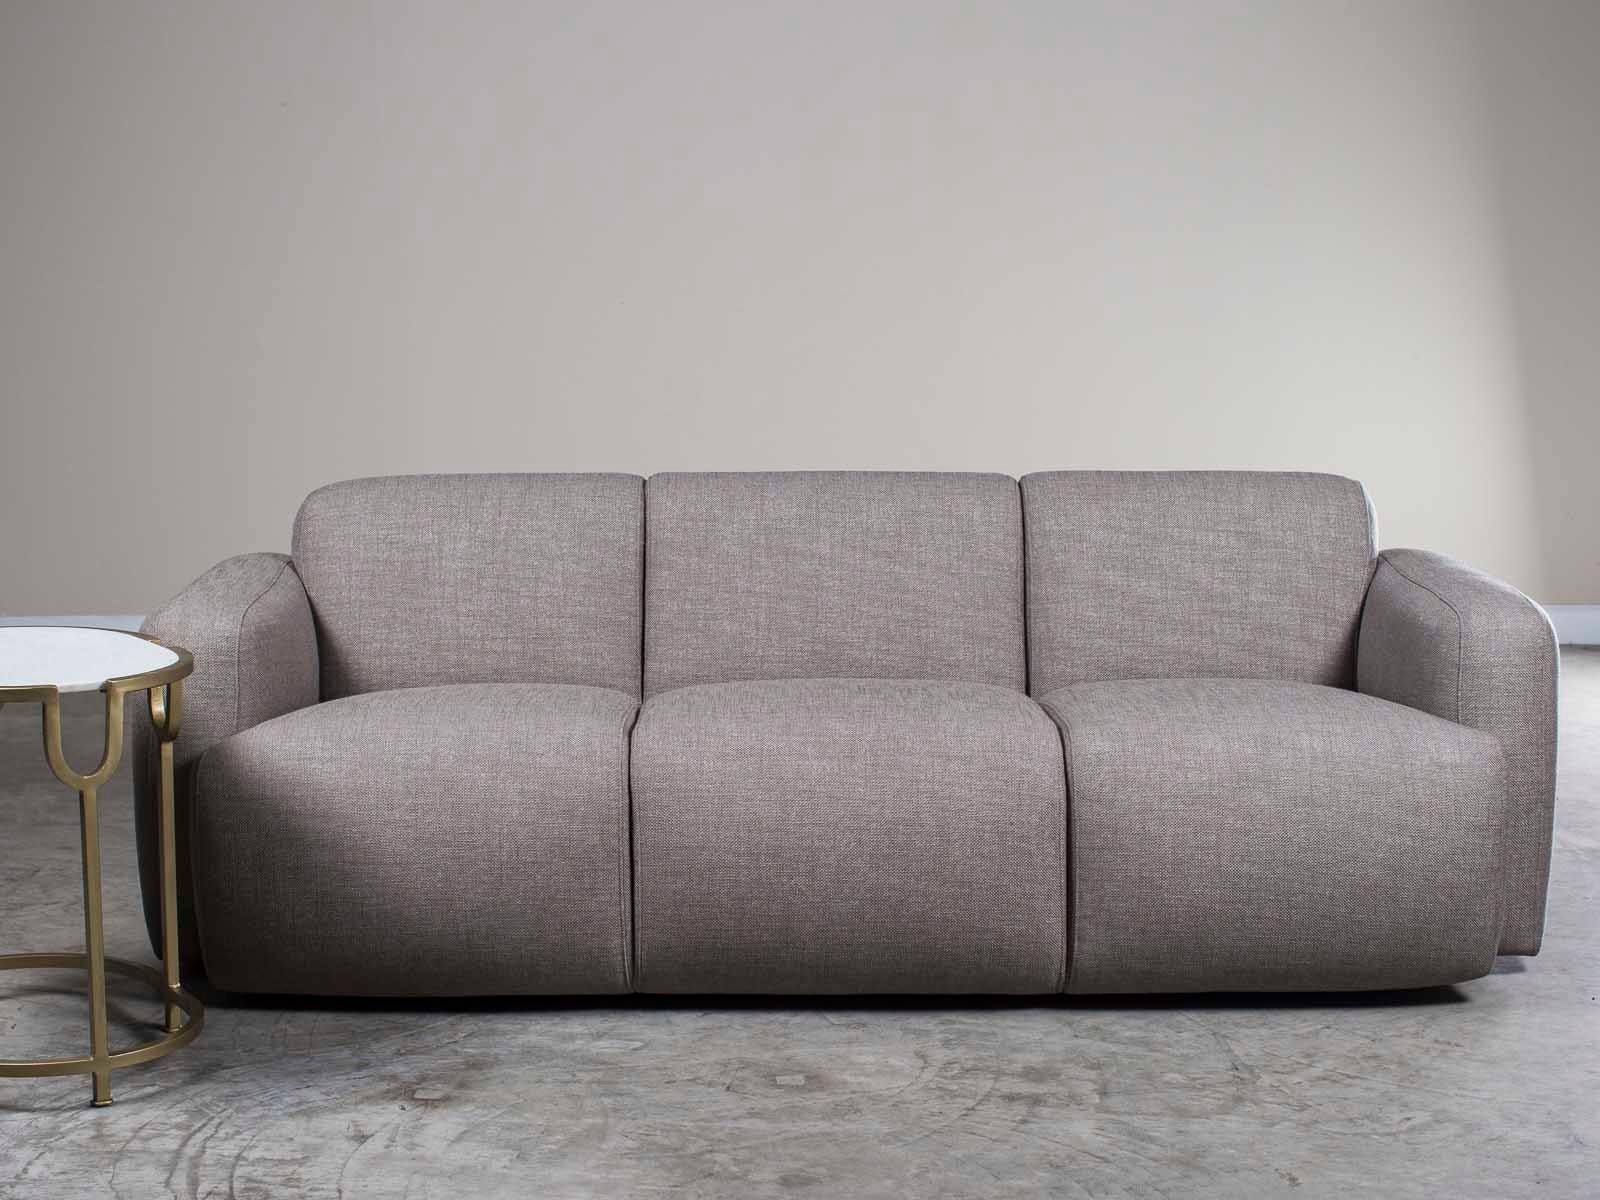 An inviting modern grey linen three cushion sofa from Holland having contemporary rounded lines with a finished back. The soft color of the upholstery combined with the gentle curves immediately signals 